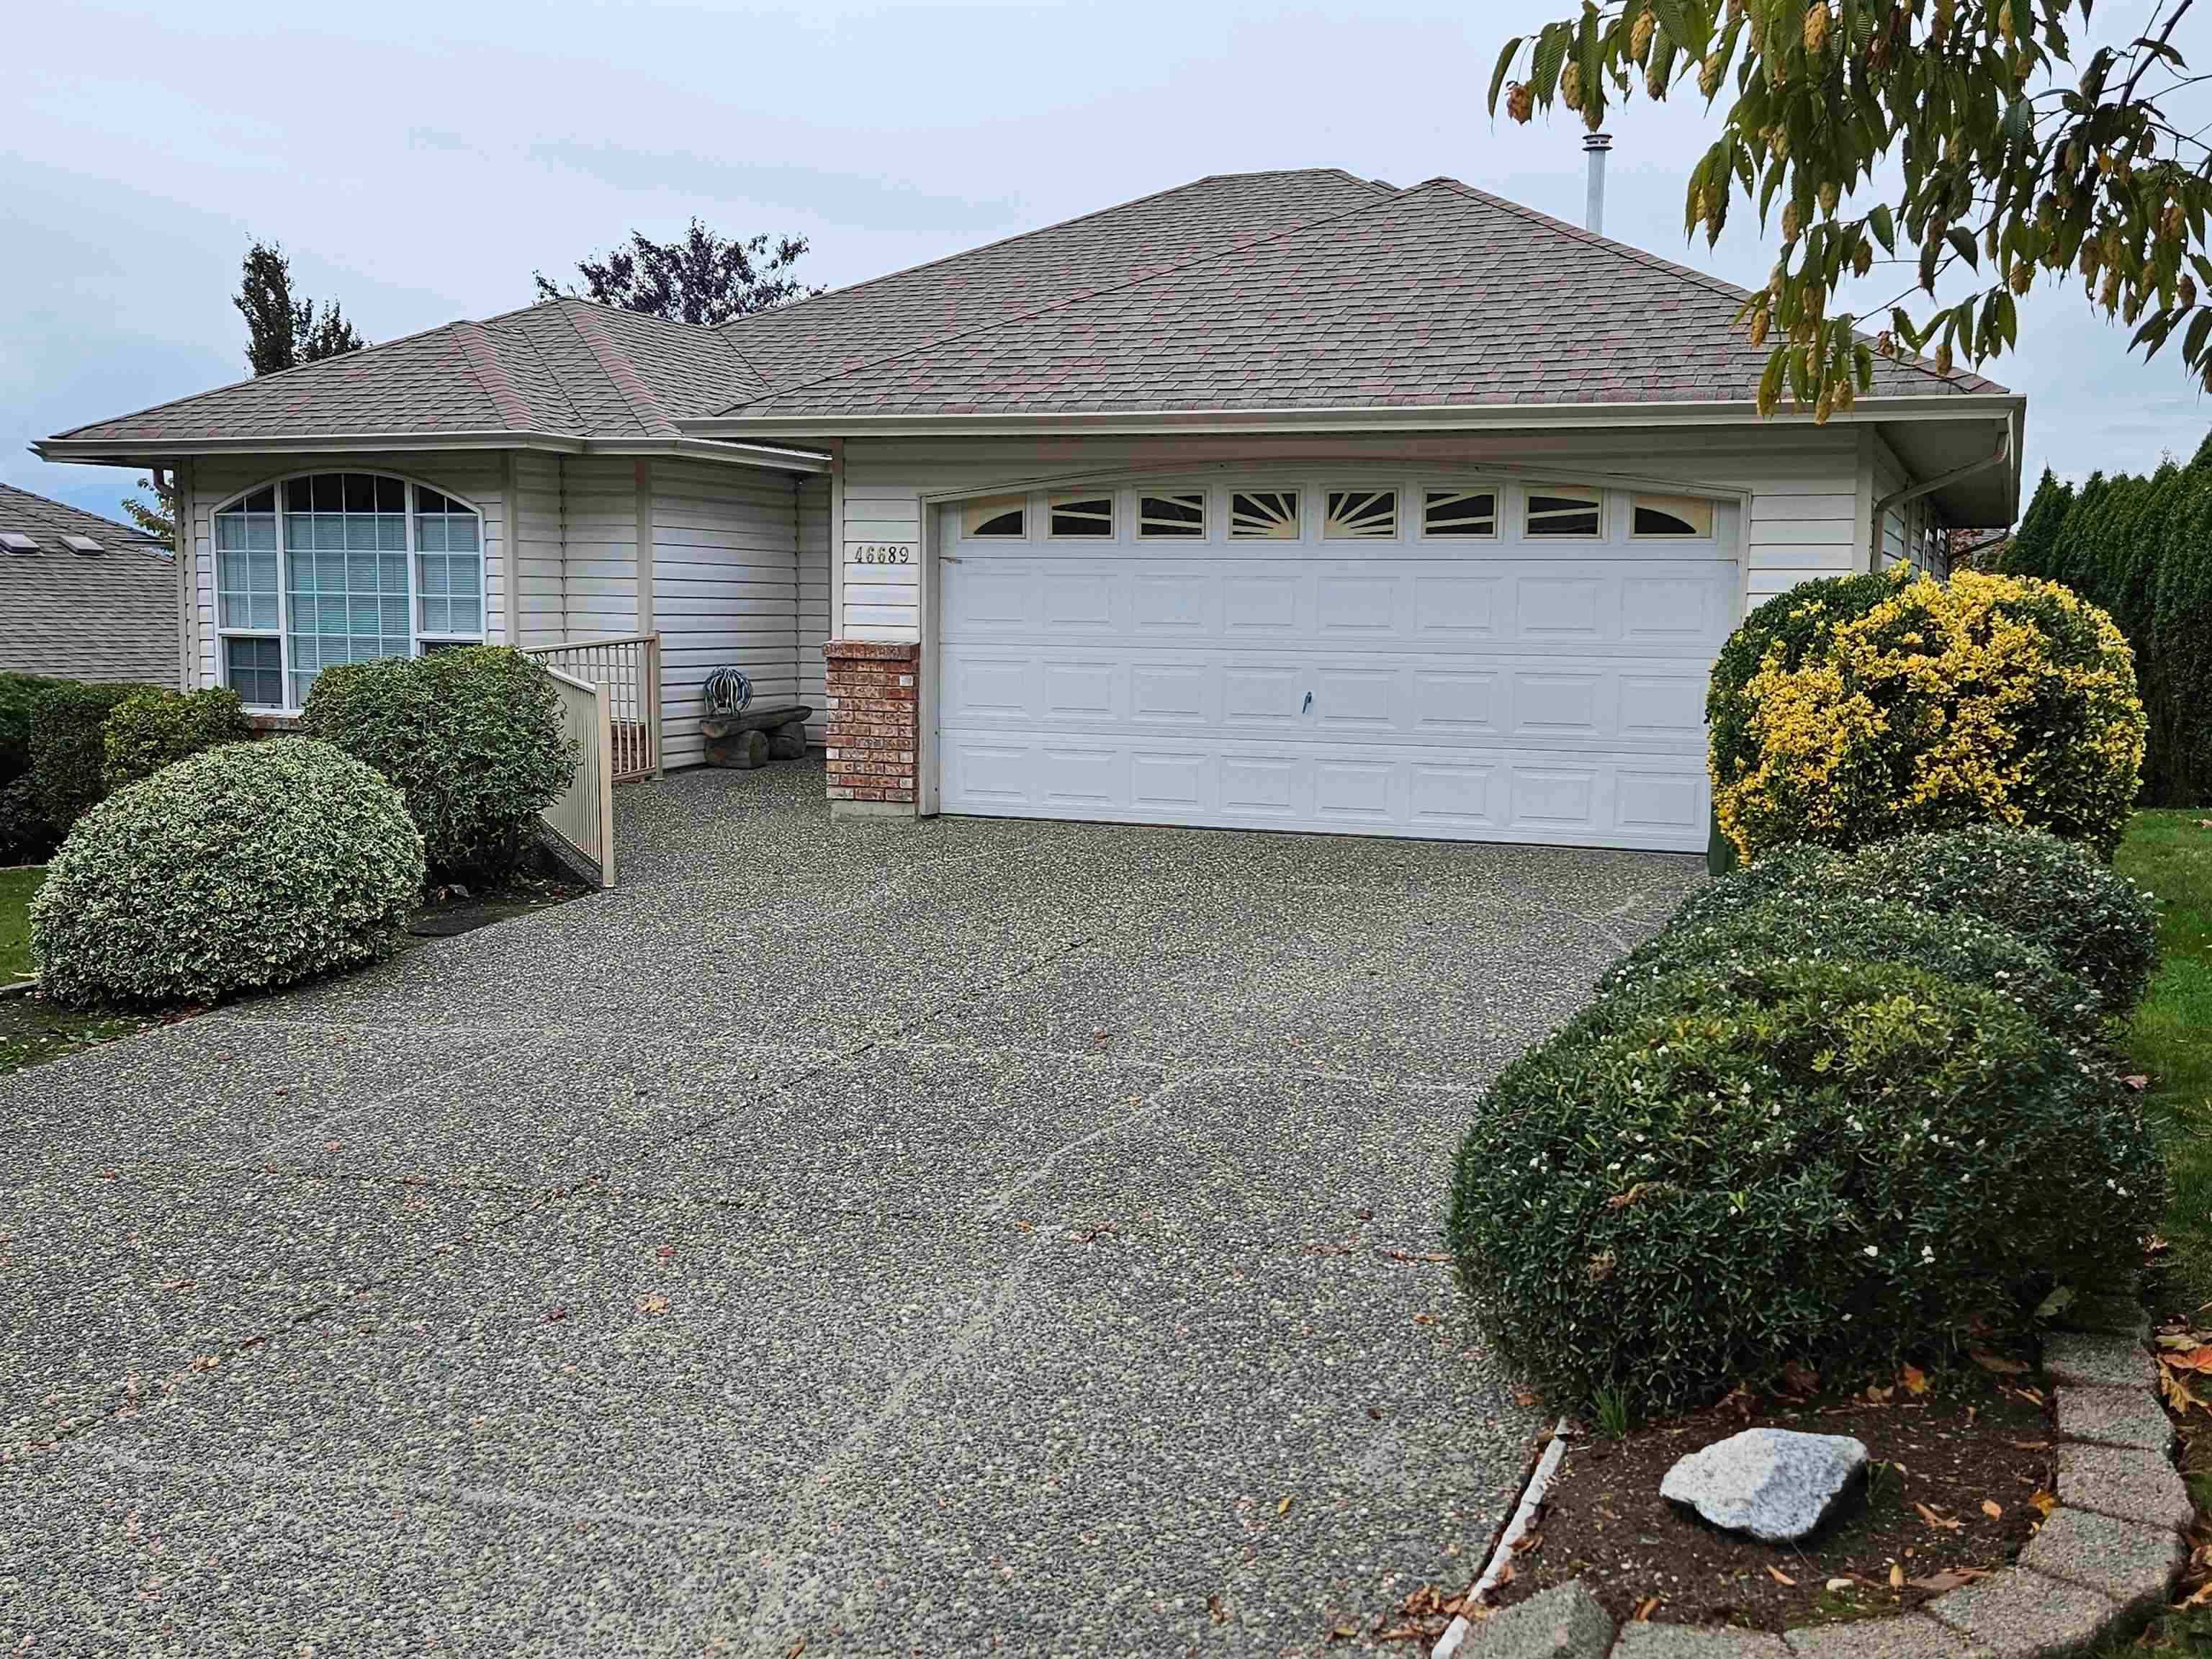 Open House. Open House on Saturday, December 16, 2023 1:00PM - 4:00PM
46689-Braeside Ave Chilliwack. Nice neighborhood on Promontory. Nice street appeal. Level wheel chair friendly entry with walk out basement into private fenced yard. Lots of room up and